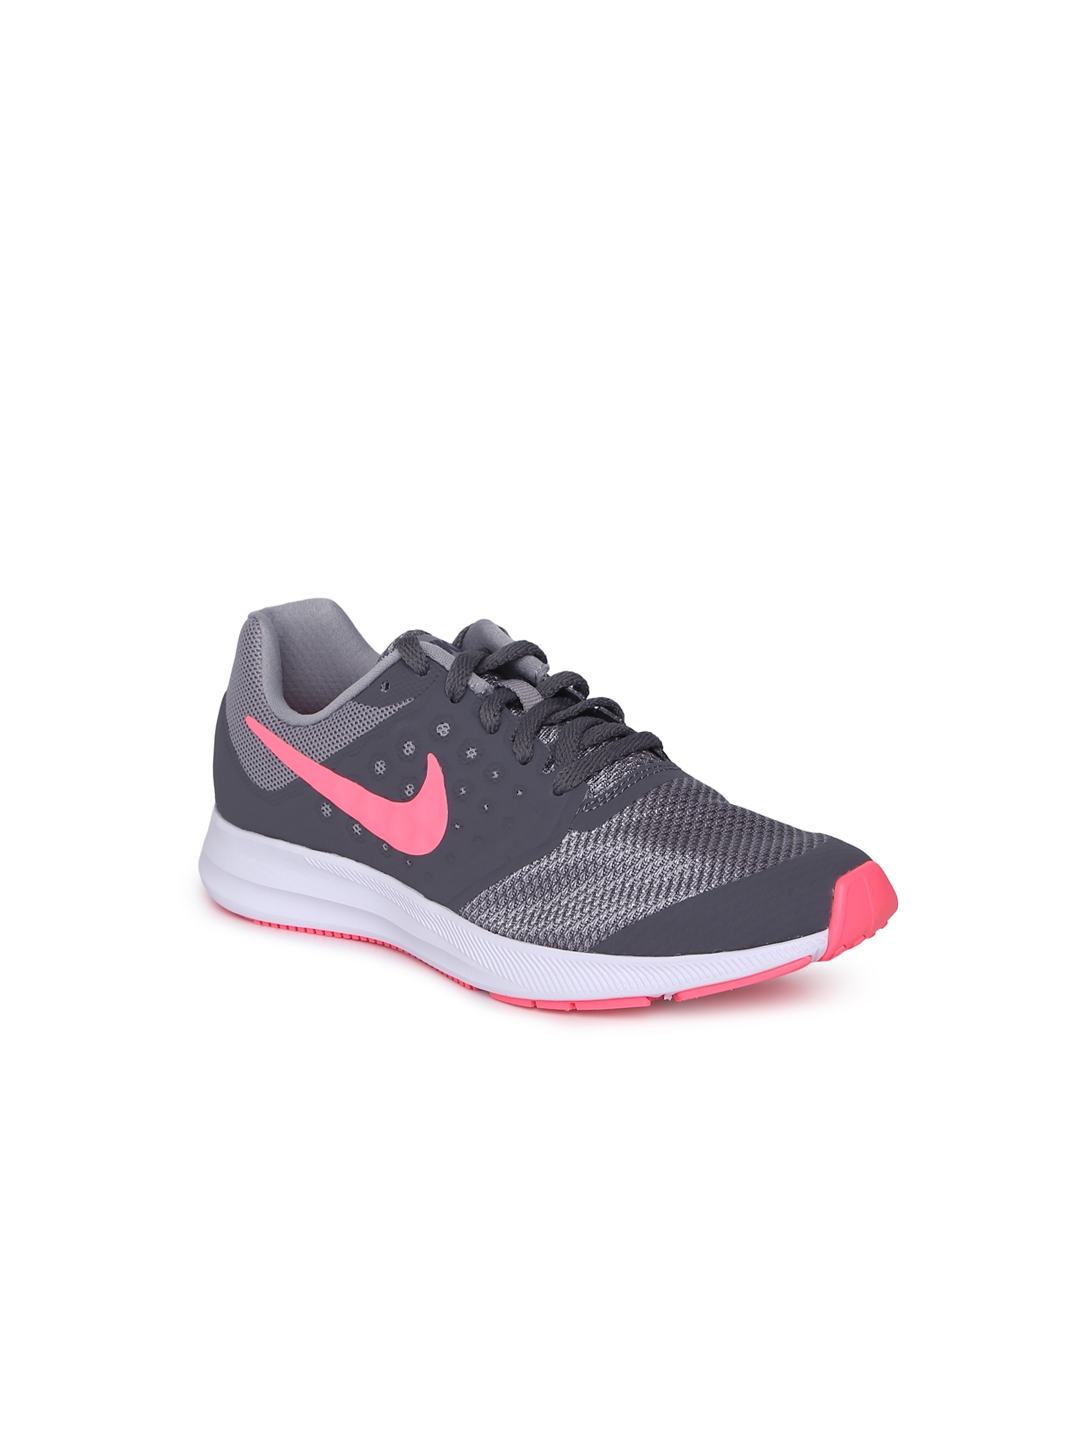 99 Confortable Sport shoes for girls nike for Christmas Day